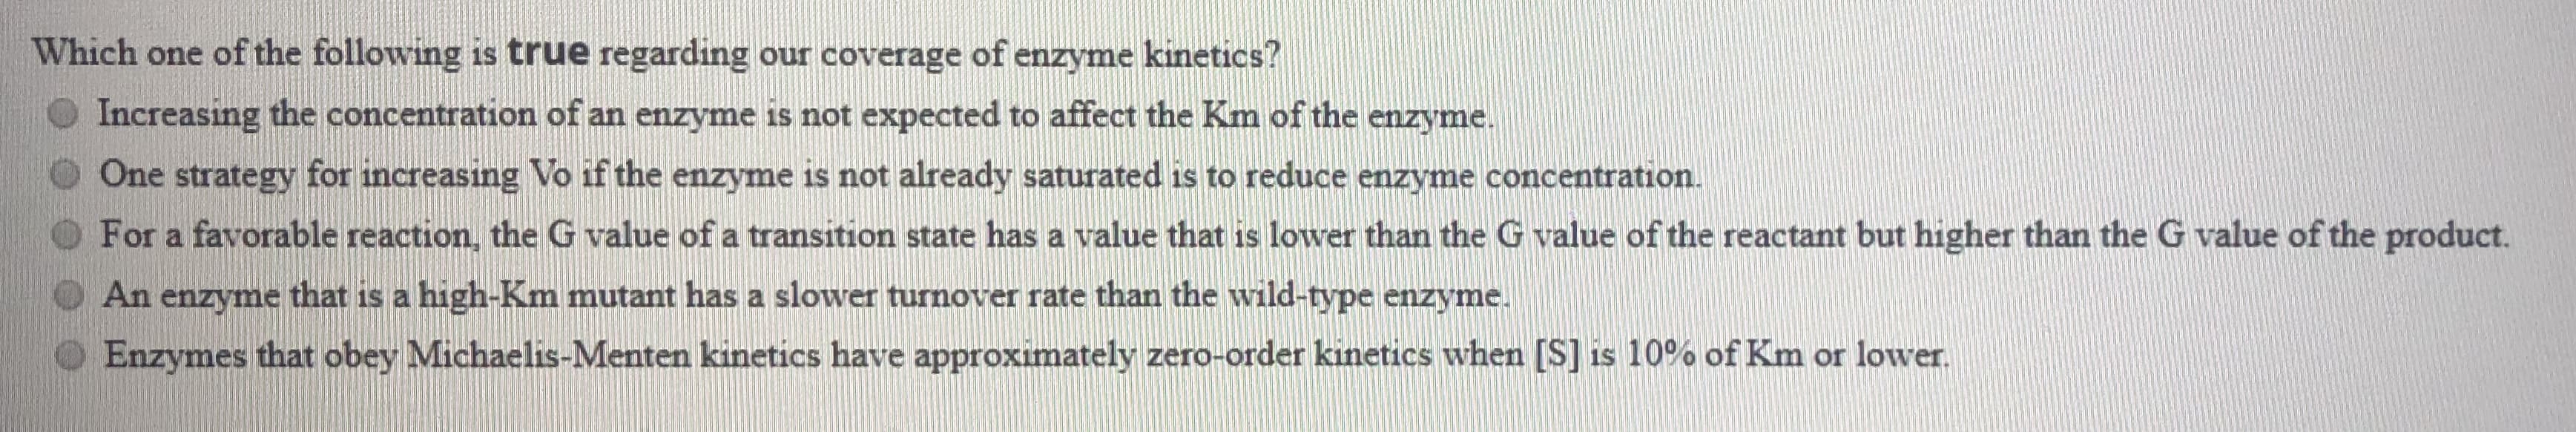 Which one of the following is true regarding our coverage of enzyme kinetics?
Increasing the concentration of an enzyme is not expected to affect the Km of the enzyme.
One strategy for increasing Vo if the enzyme is not already saturated is to reduce enzyme concentration.
For a favorable reaction, the G value of a transition state has a value that is lower than the G value of the reactant but higher than the G value of the product.
An enzyme that is a high-Km mutant has a slower turnover rate than the wild-type enzyme.
Enzymes that obey Michaelis-Menten kinetics have approximately zero-order kinetics when [S] is 10% of Km or lower.
